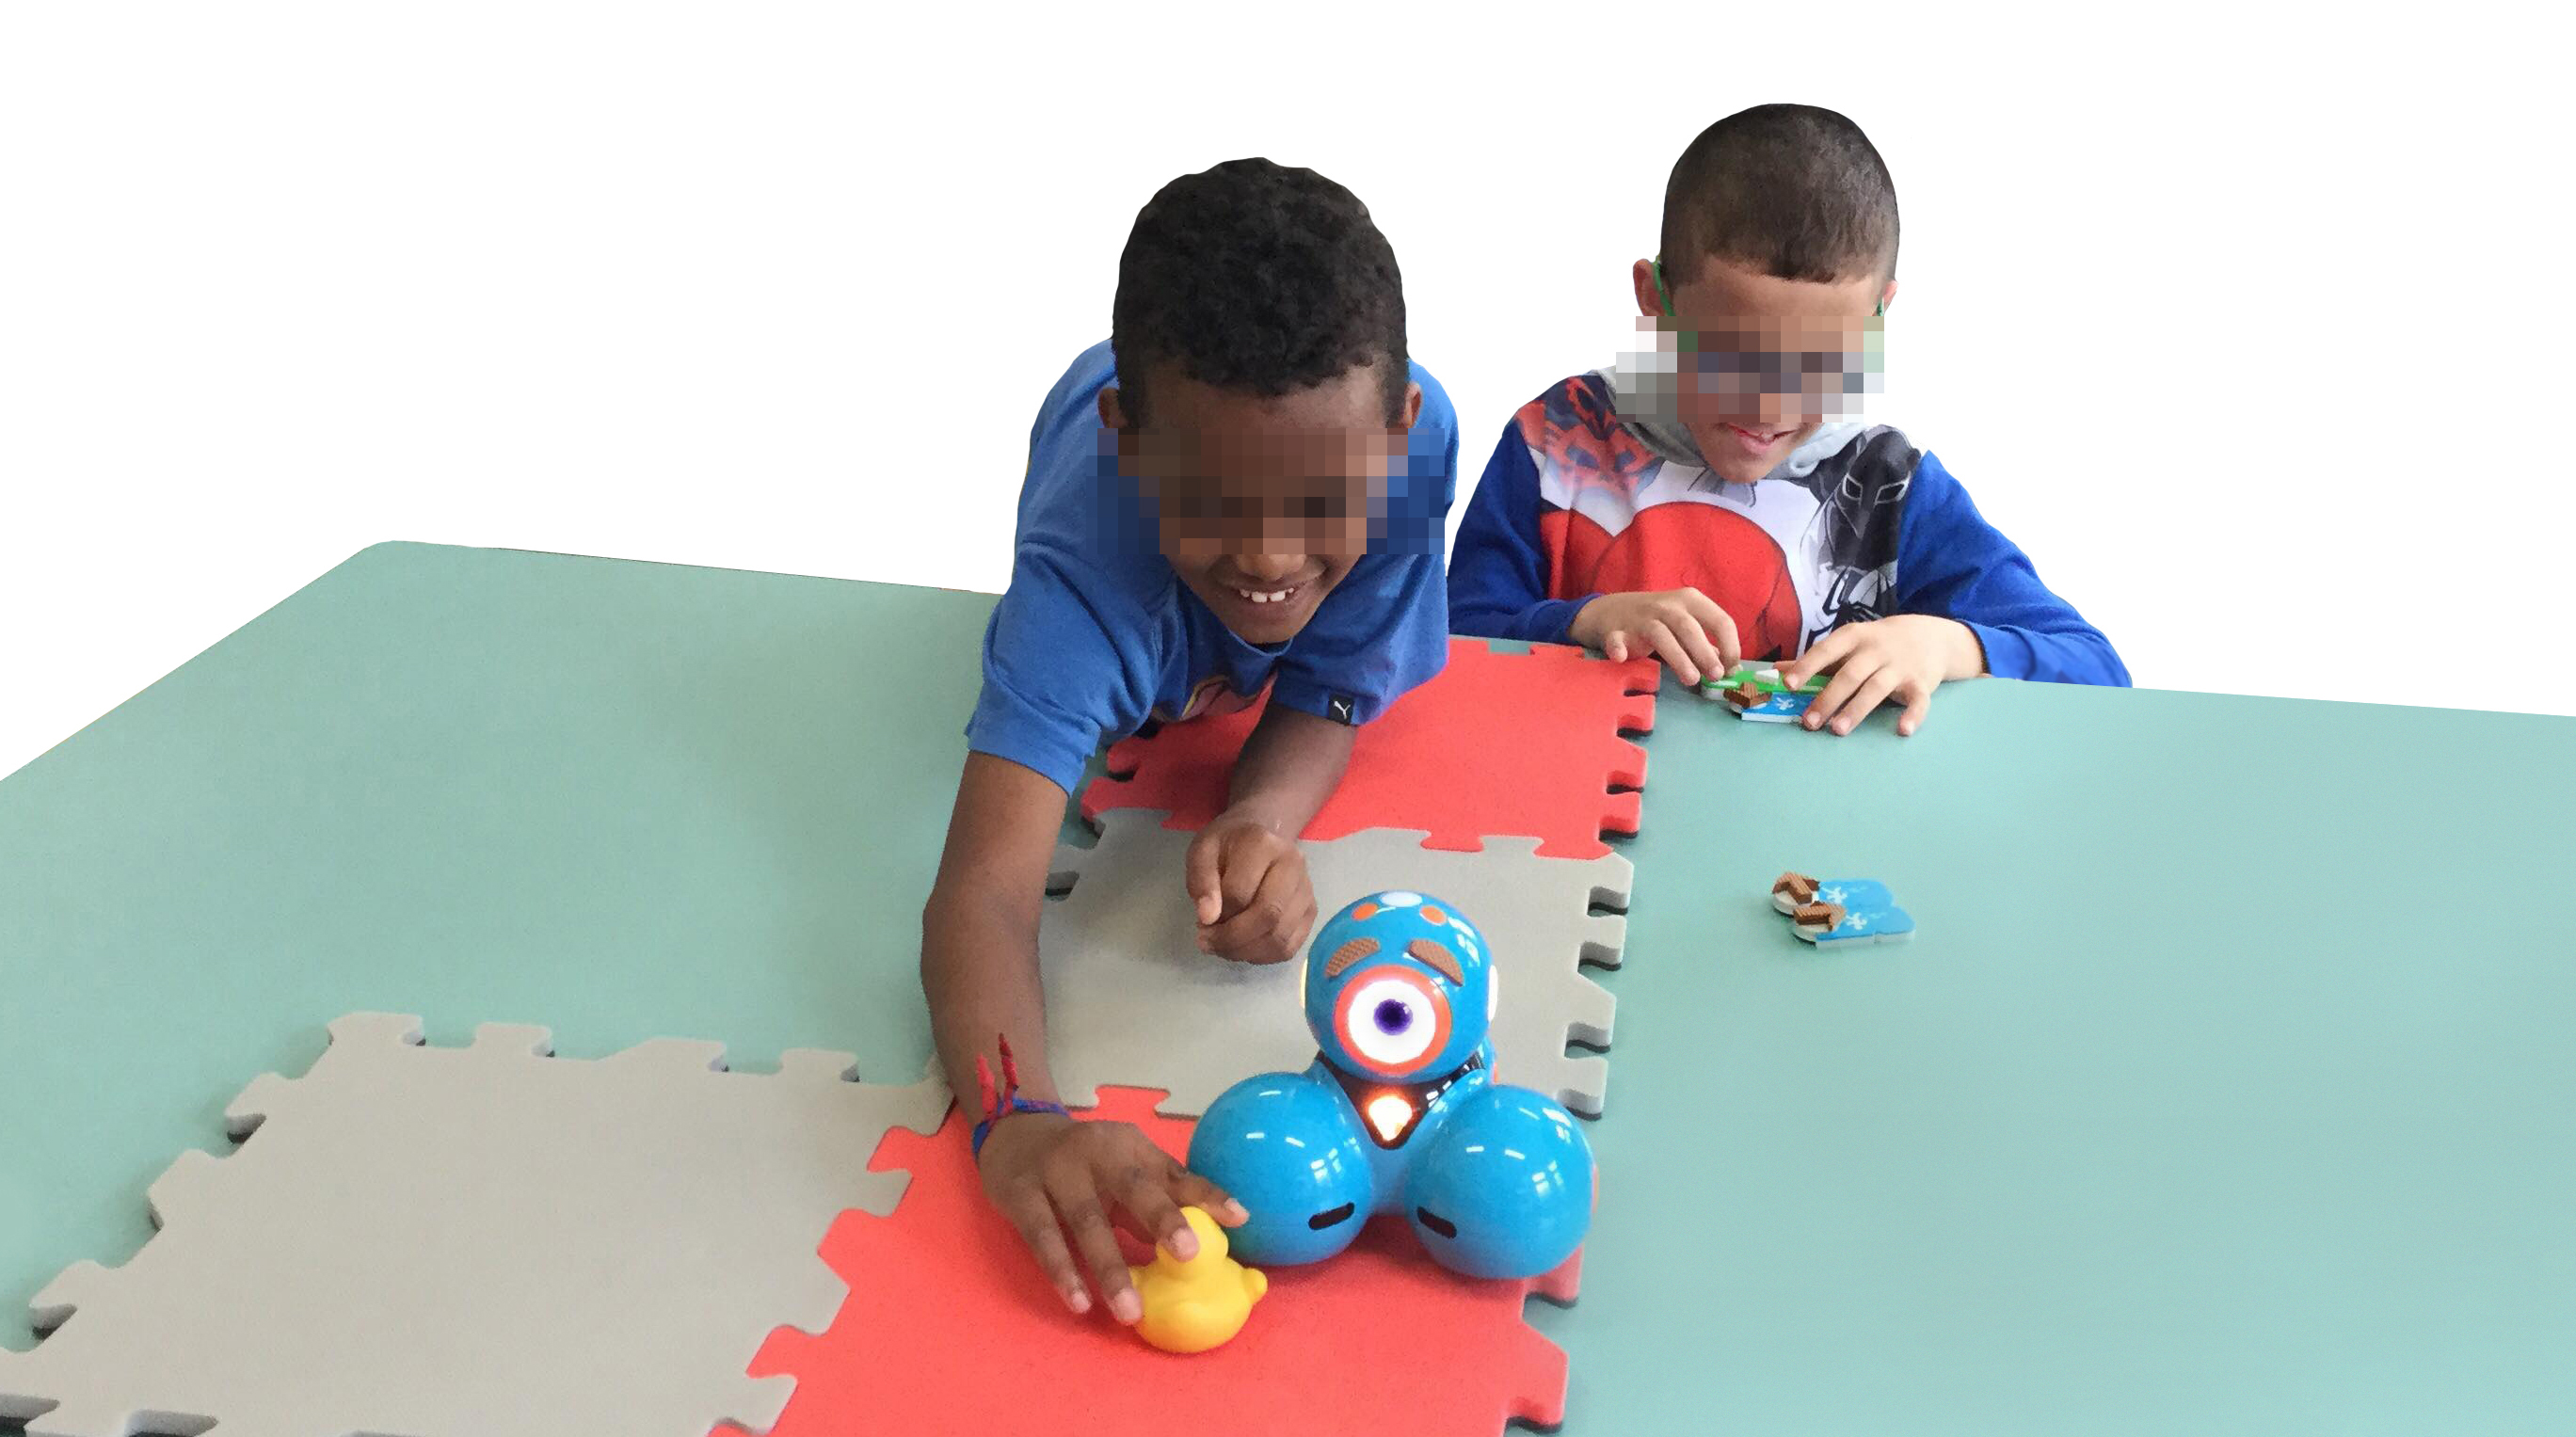 Two children with visual impairments, one attaching a forward and play pieces, and the other feeling the robot and the target object, that walked through a foam path.